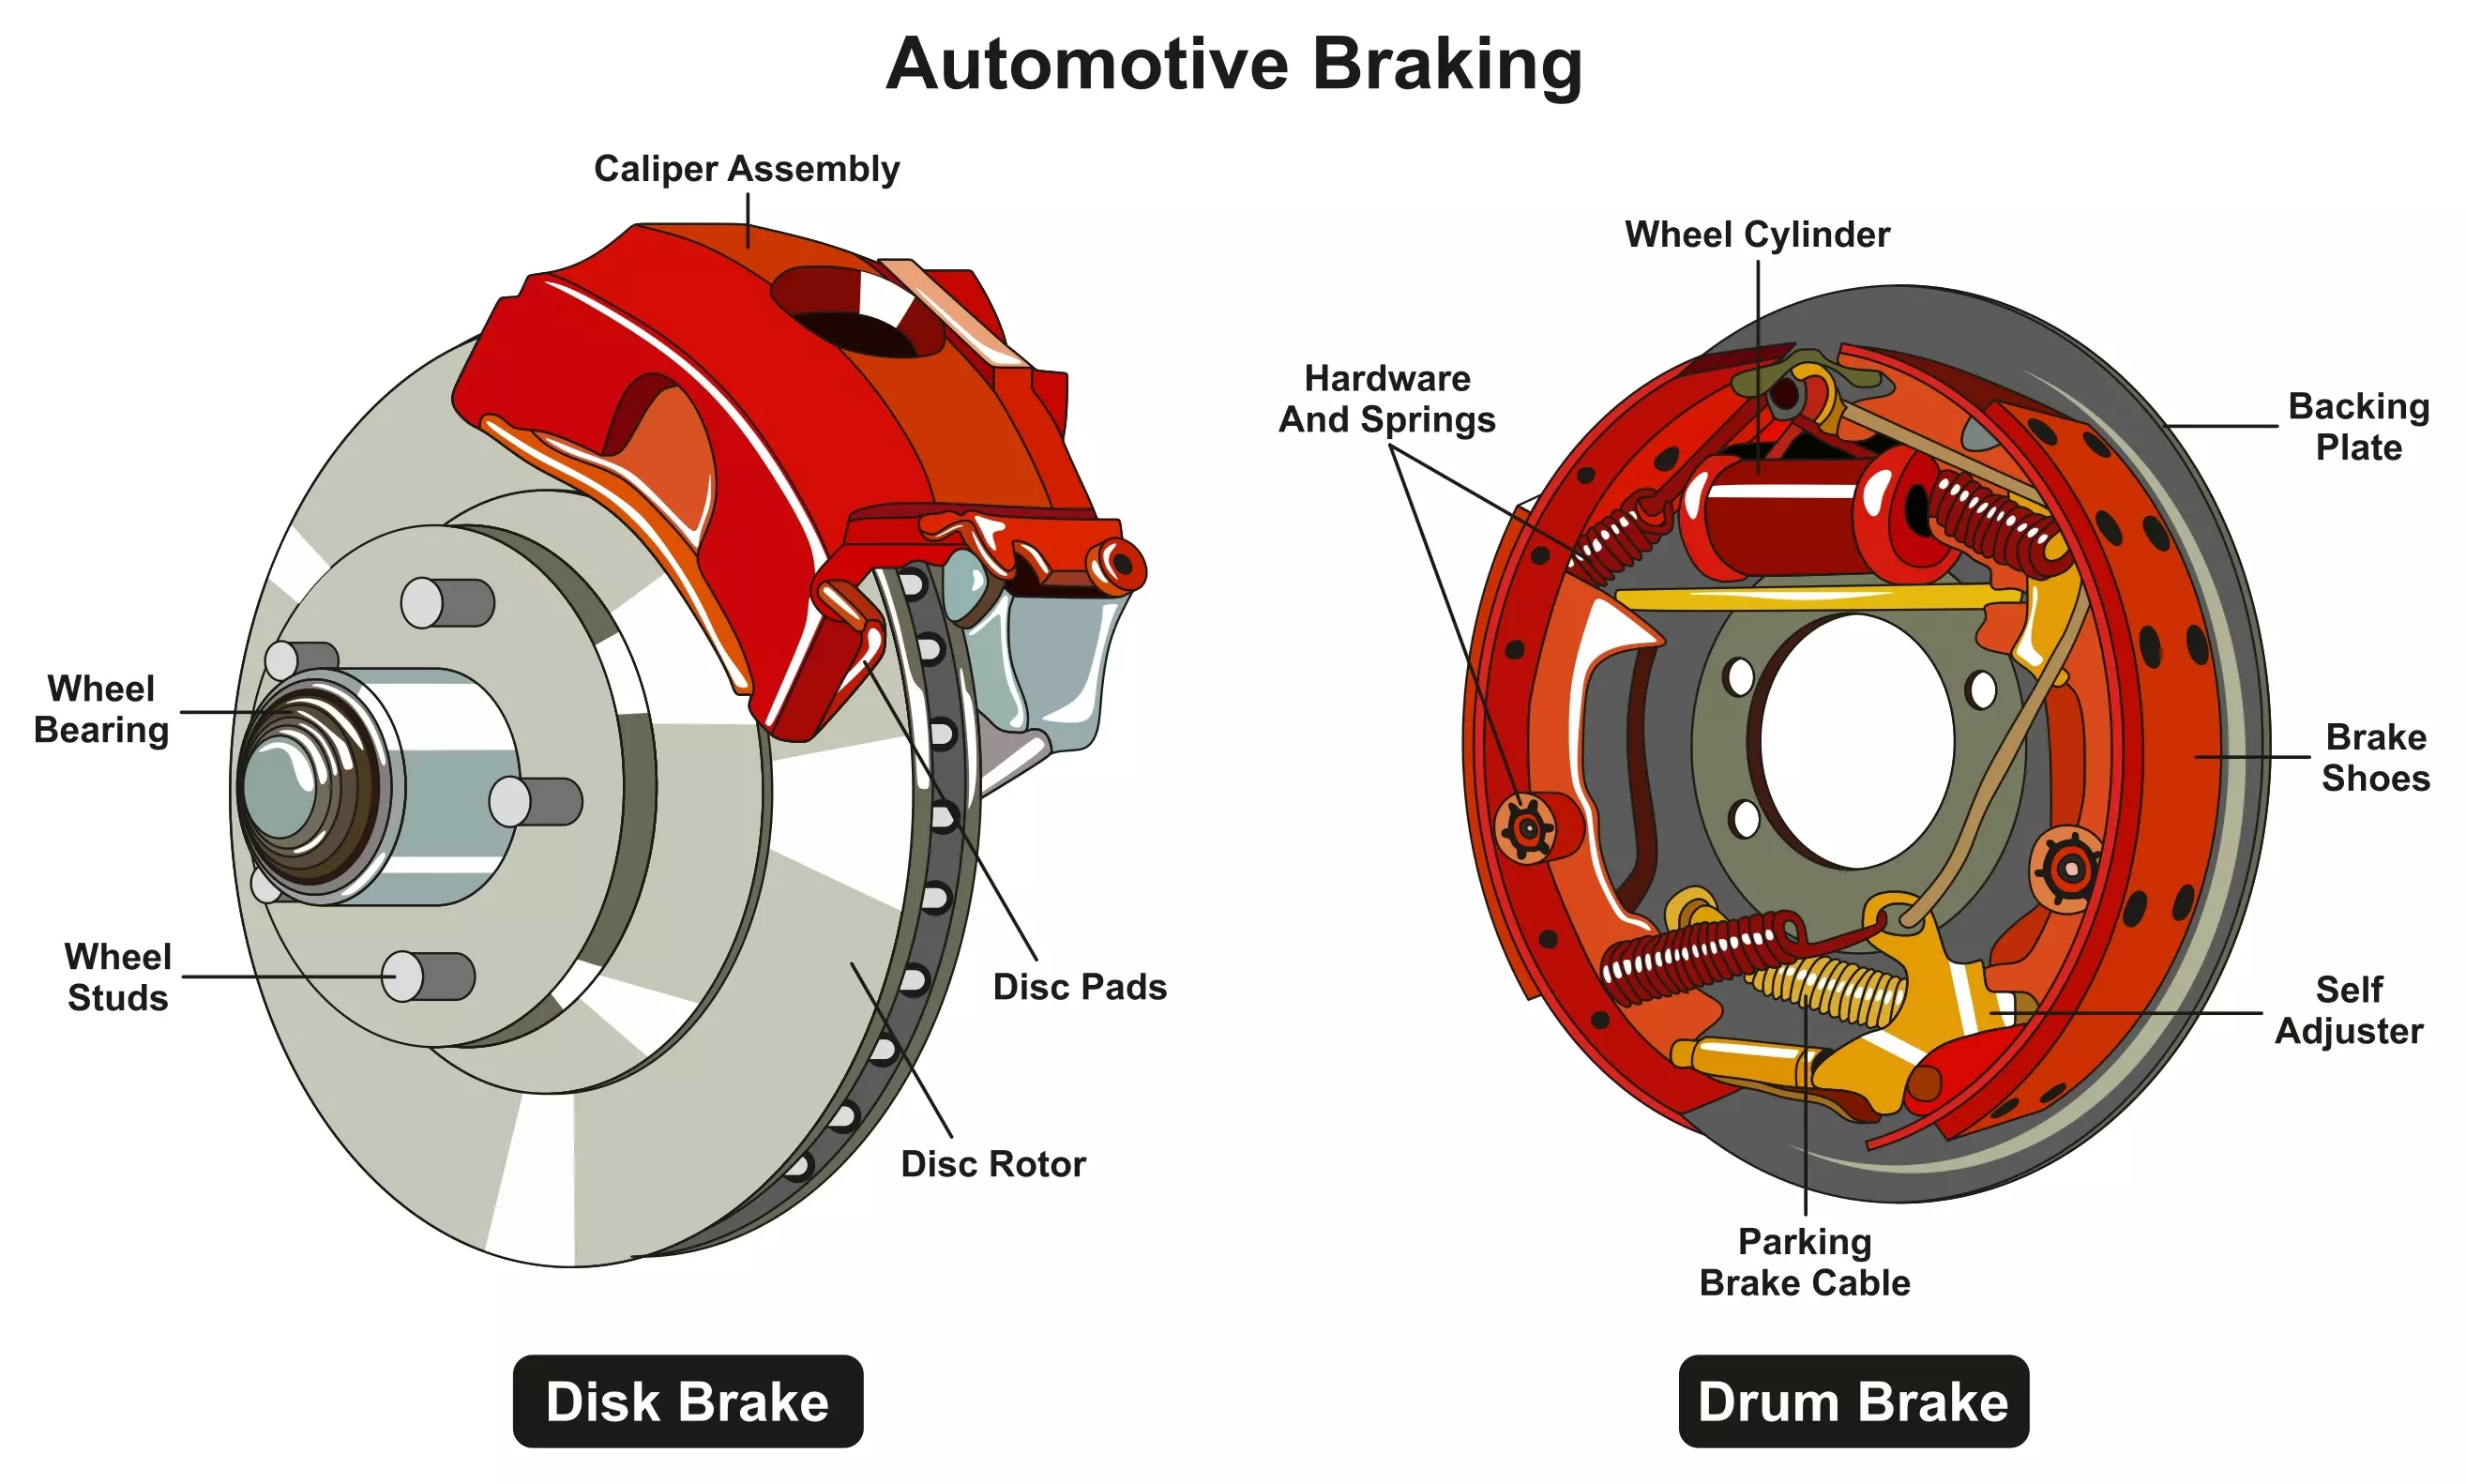 Basic disc and drum brake components